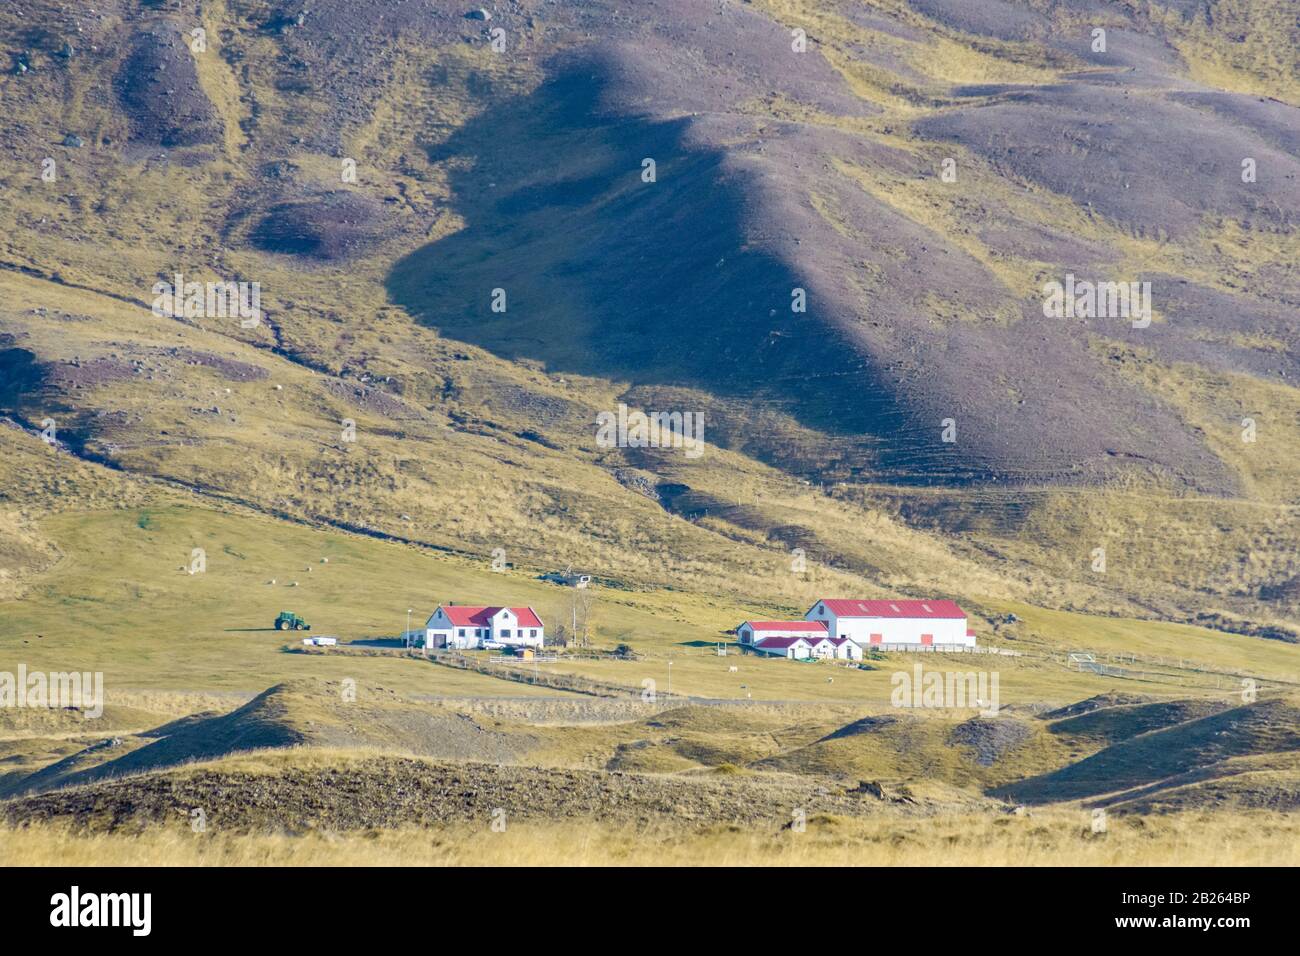 Northern Iceland farm based at the foot of a mountain slope during sunshine weather Stock Photo